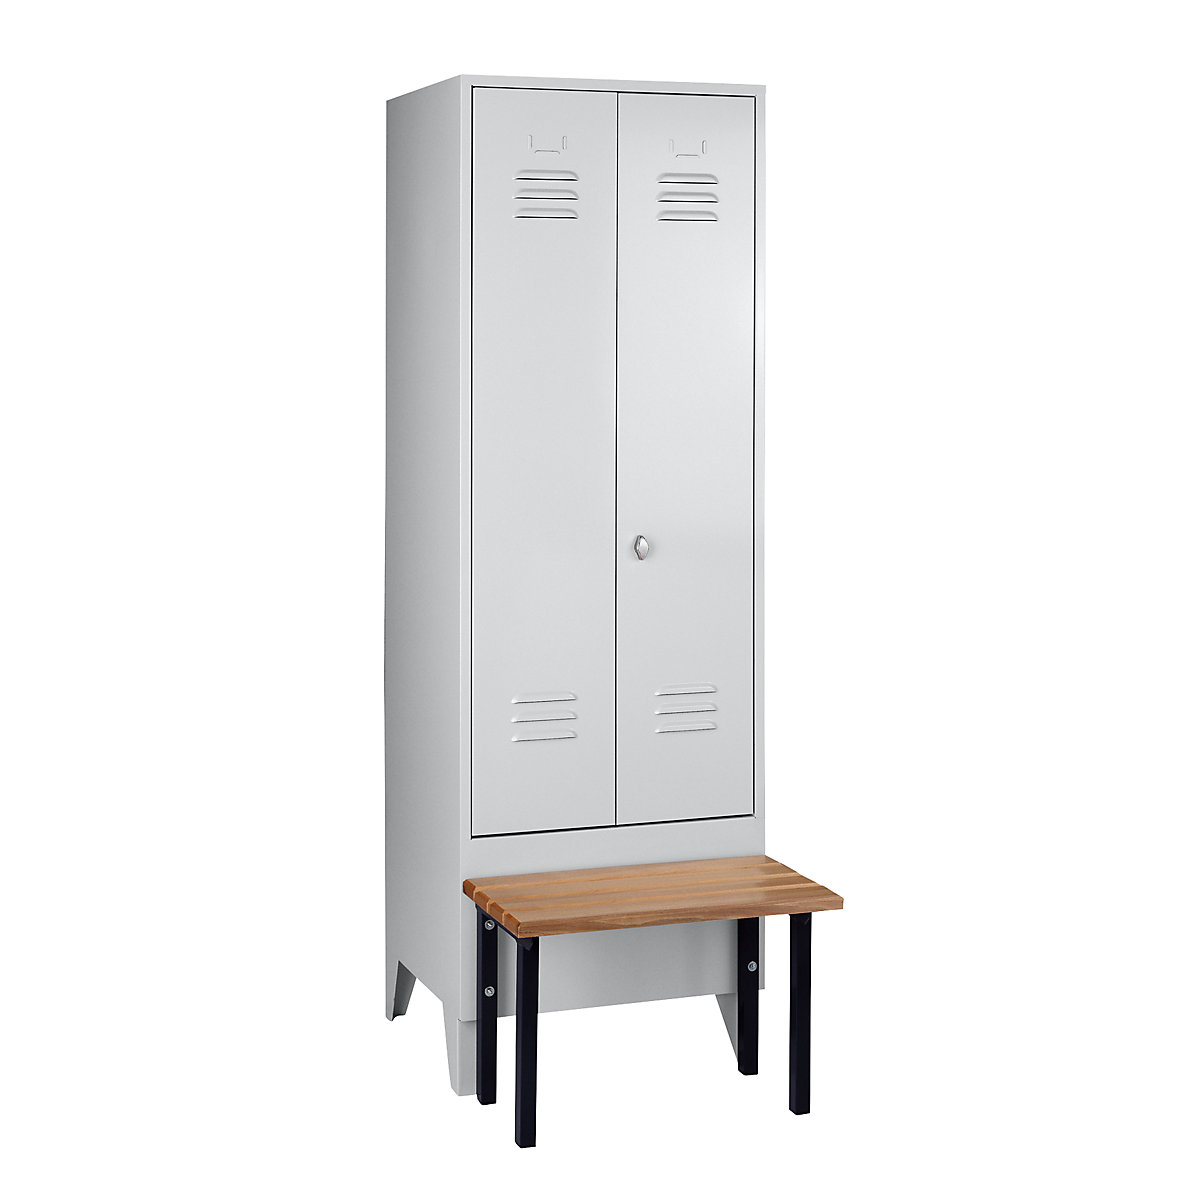 Clothes locker with bench mounted in front – Wolf